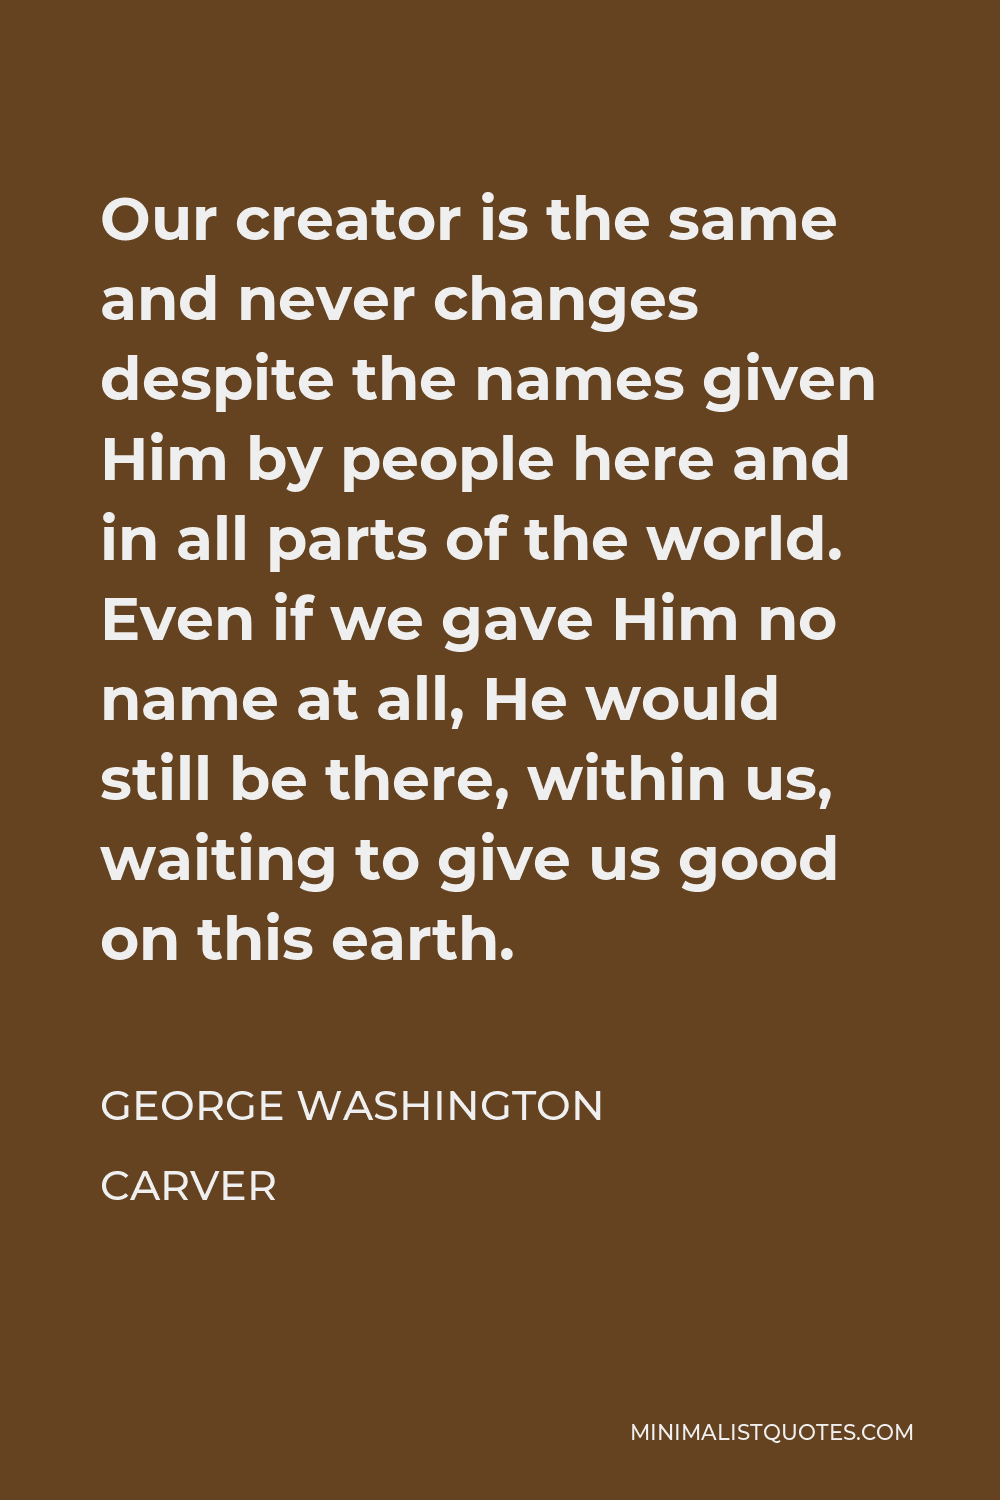 George Washington Carver Quote - Our creator is the same and never changes despite the names given Him by people here and in all parts of the world. Even if we gave Him no name at all, He would still be there, within us, waiting to give us good on this earth.